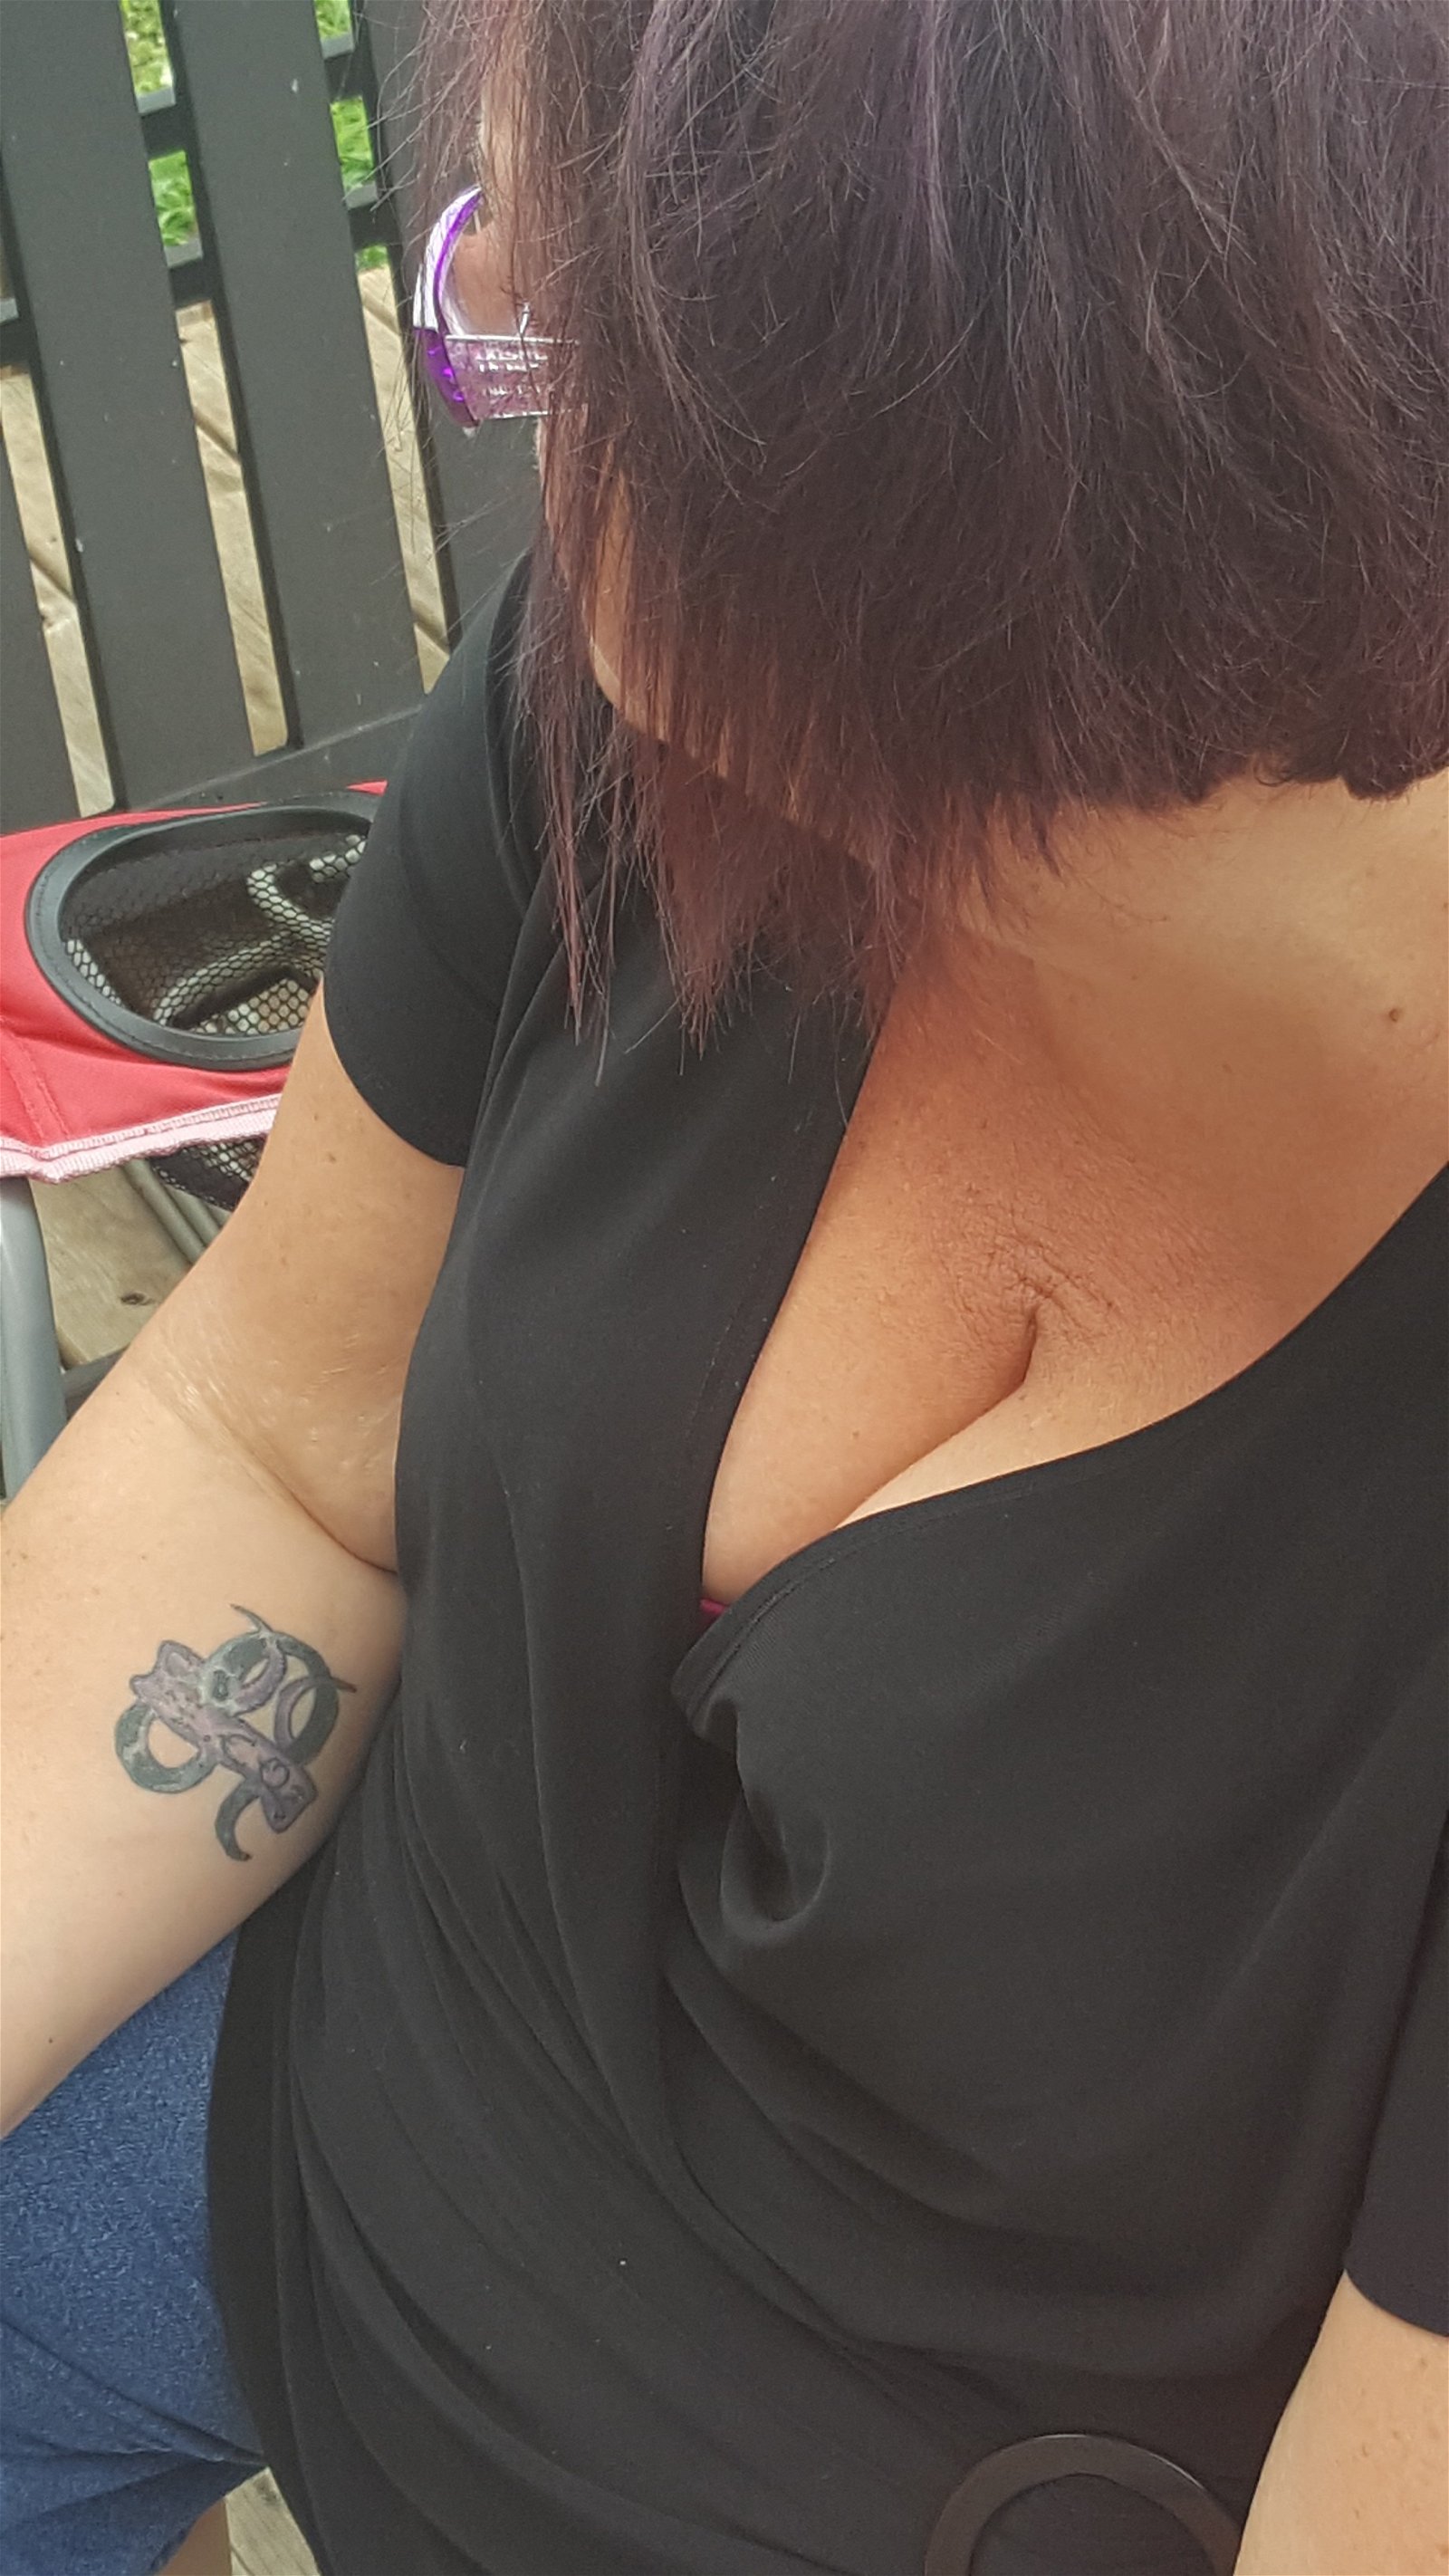 Photo by Dawn42D with the username @Dawn42D,  July 26, 2017 at 8:00 AM and the text says 'Mrs wore this out today. I love it when she shows her cleavage! #wife  #bbw  #wife  #hot  #wife  #downblouse  #cleavage  #plunging  #neckline  #tops  #showing  #cleavage  #sexy  #wife  #bbw  #wvhotbbw  #wvhb  #Dawn42D'